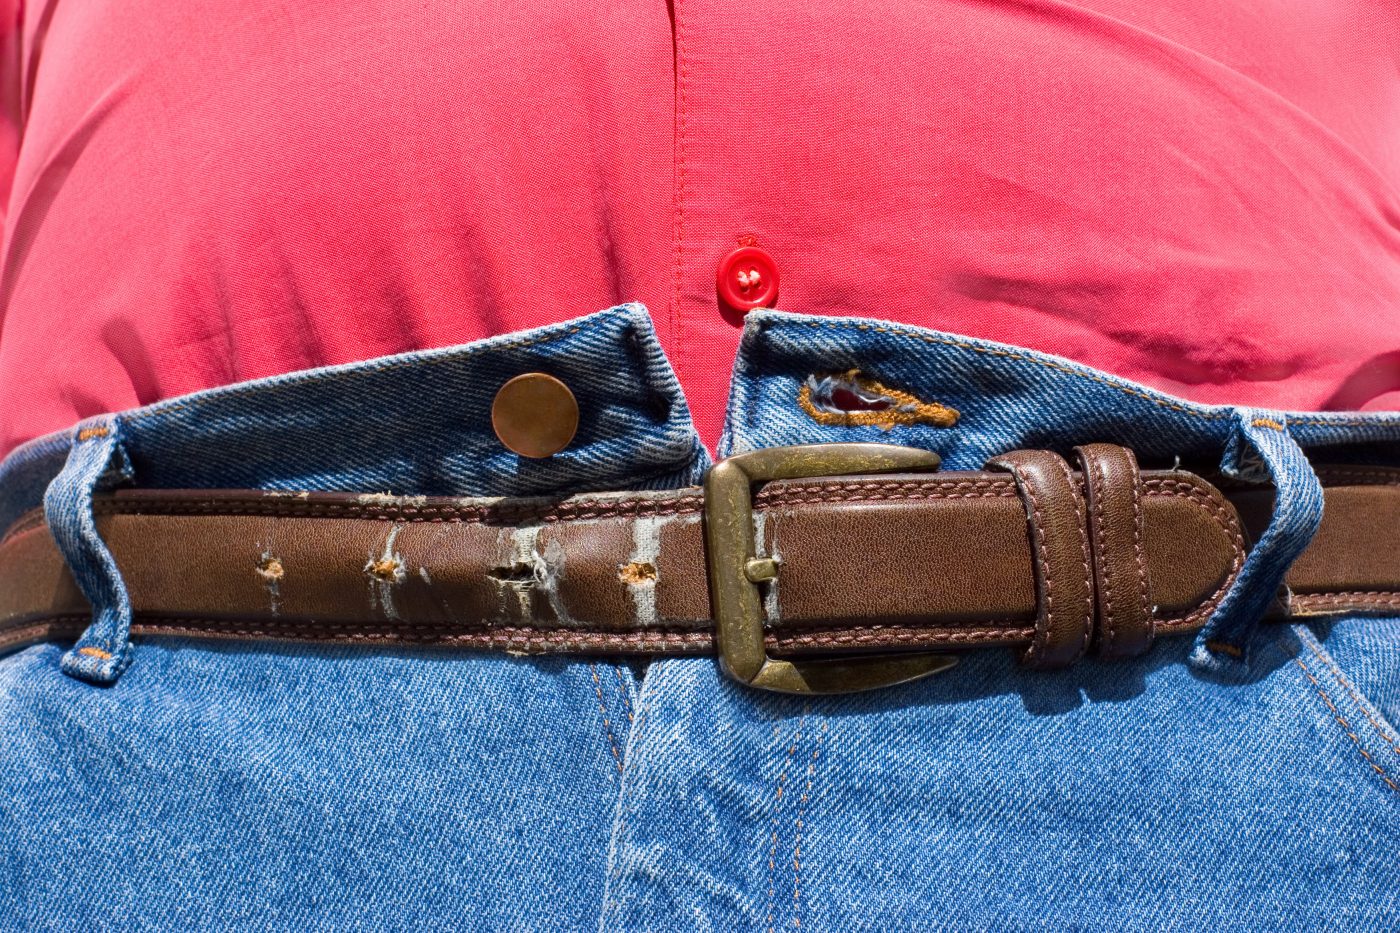 Obesity in African American Men Linked to Increased Prostate Cancer Risk